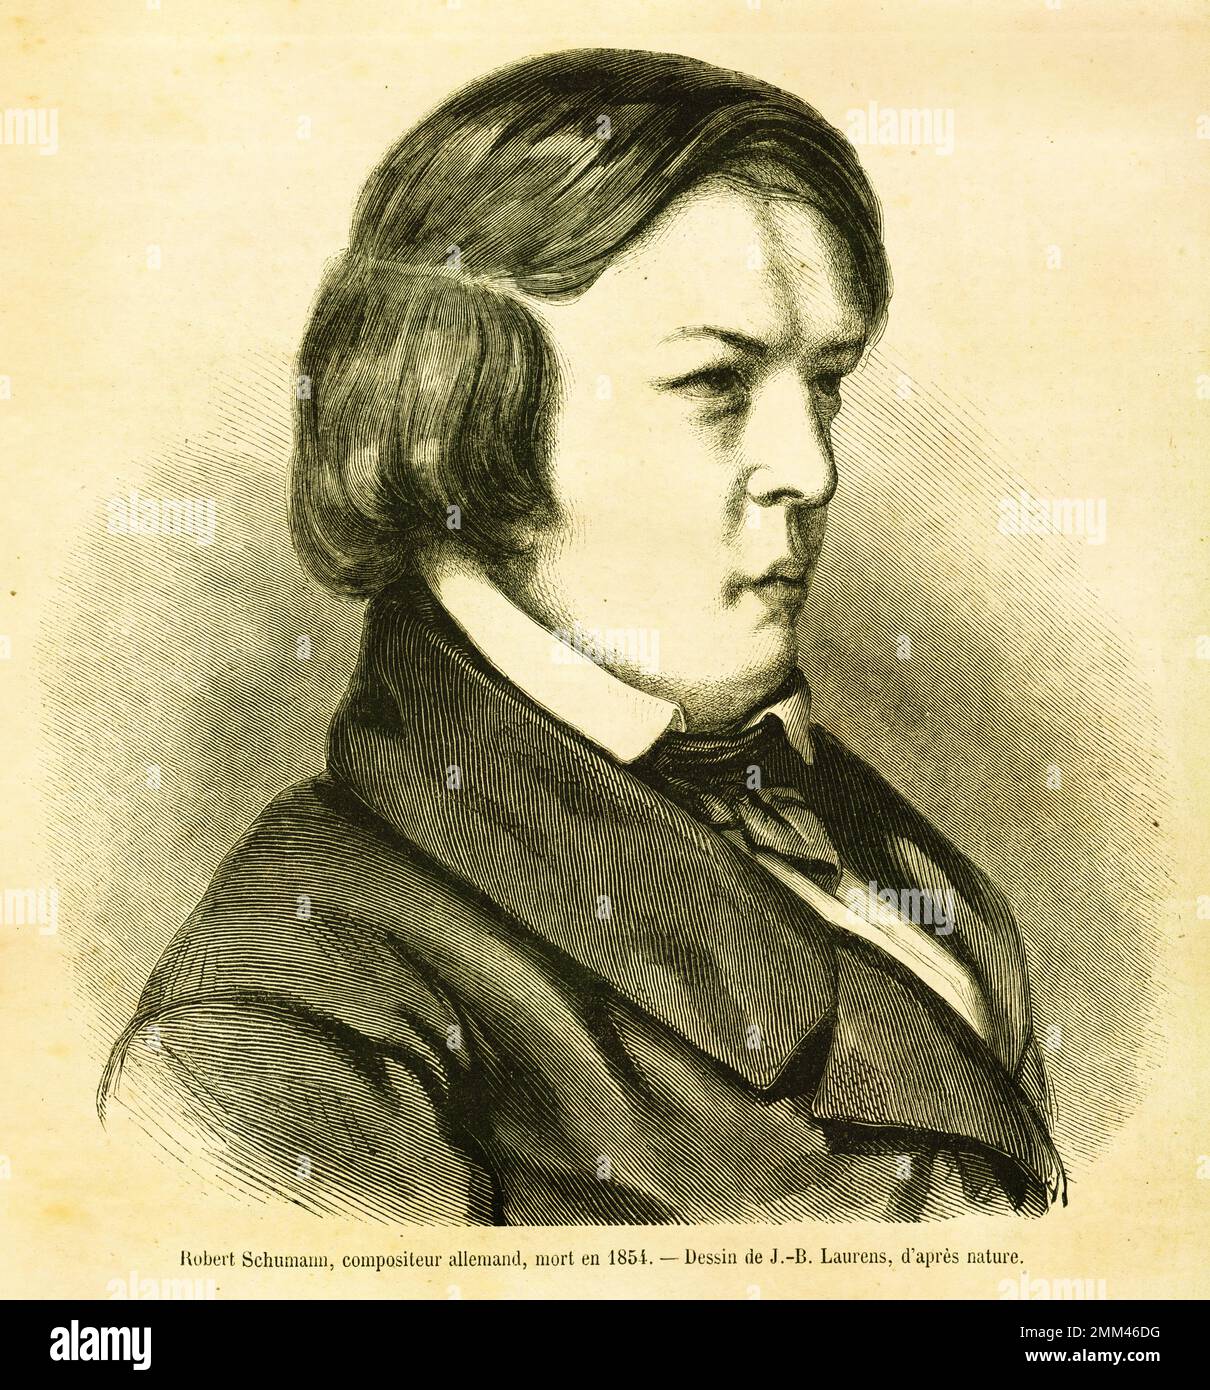 Portrait of Robert Schumann, famous German composer and music critic. He was born on June 8, 1810 in Zwickau, Germany and died on July 29, 1856 in Bon Stock Photo